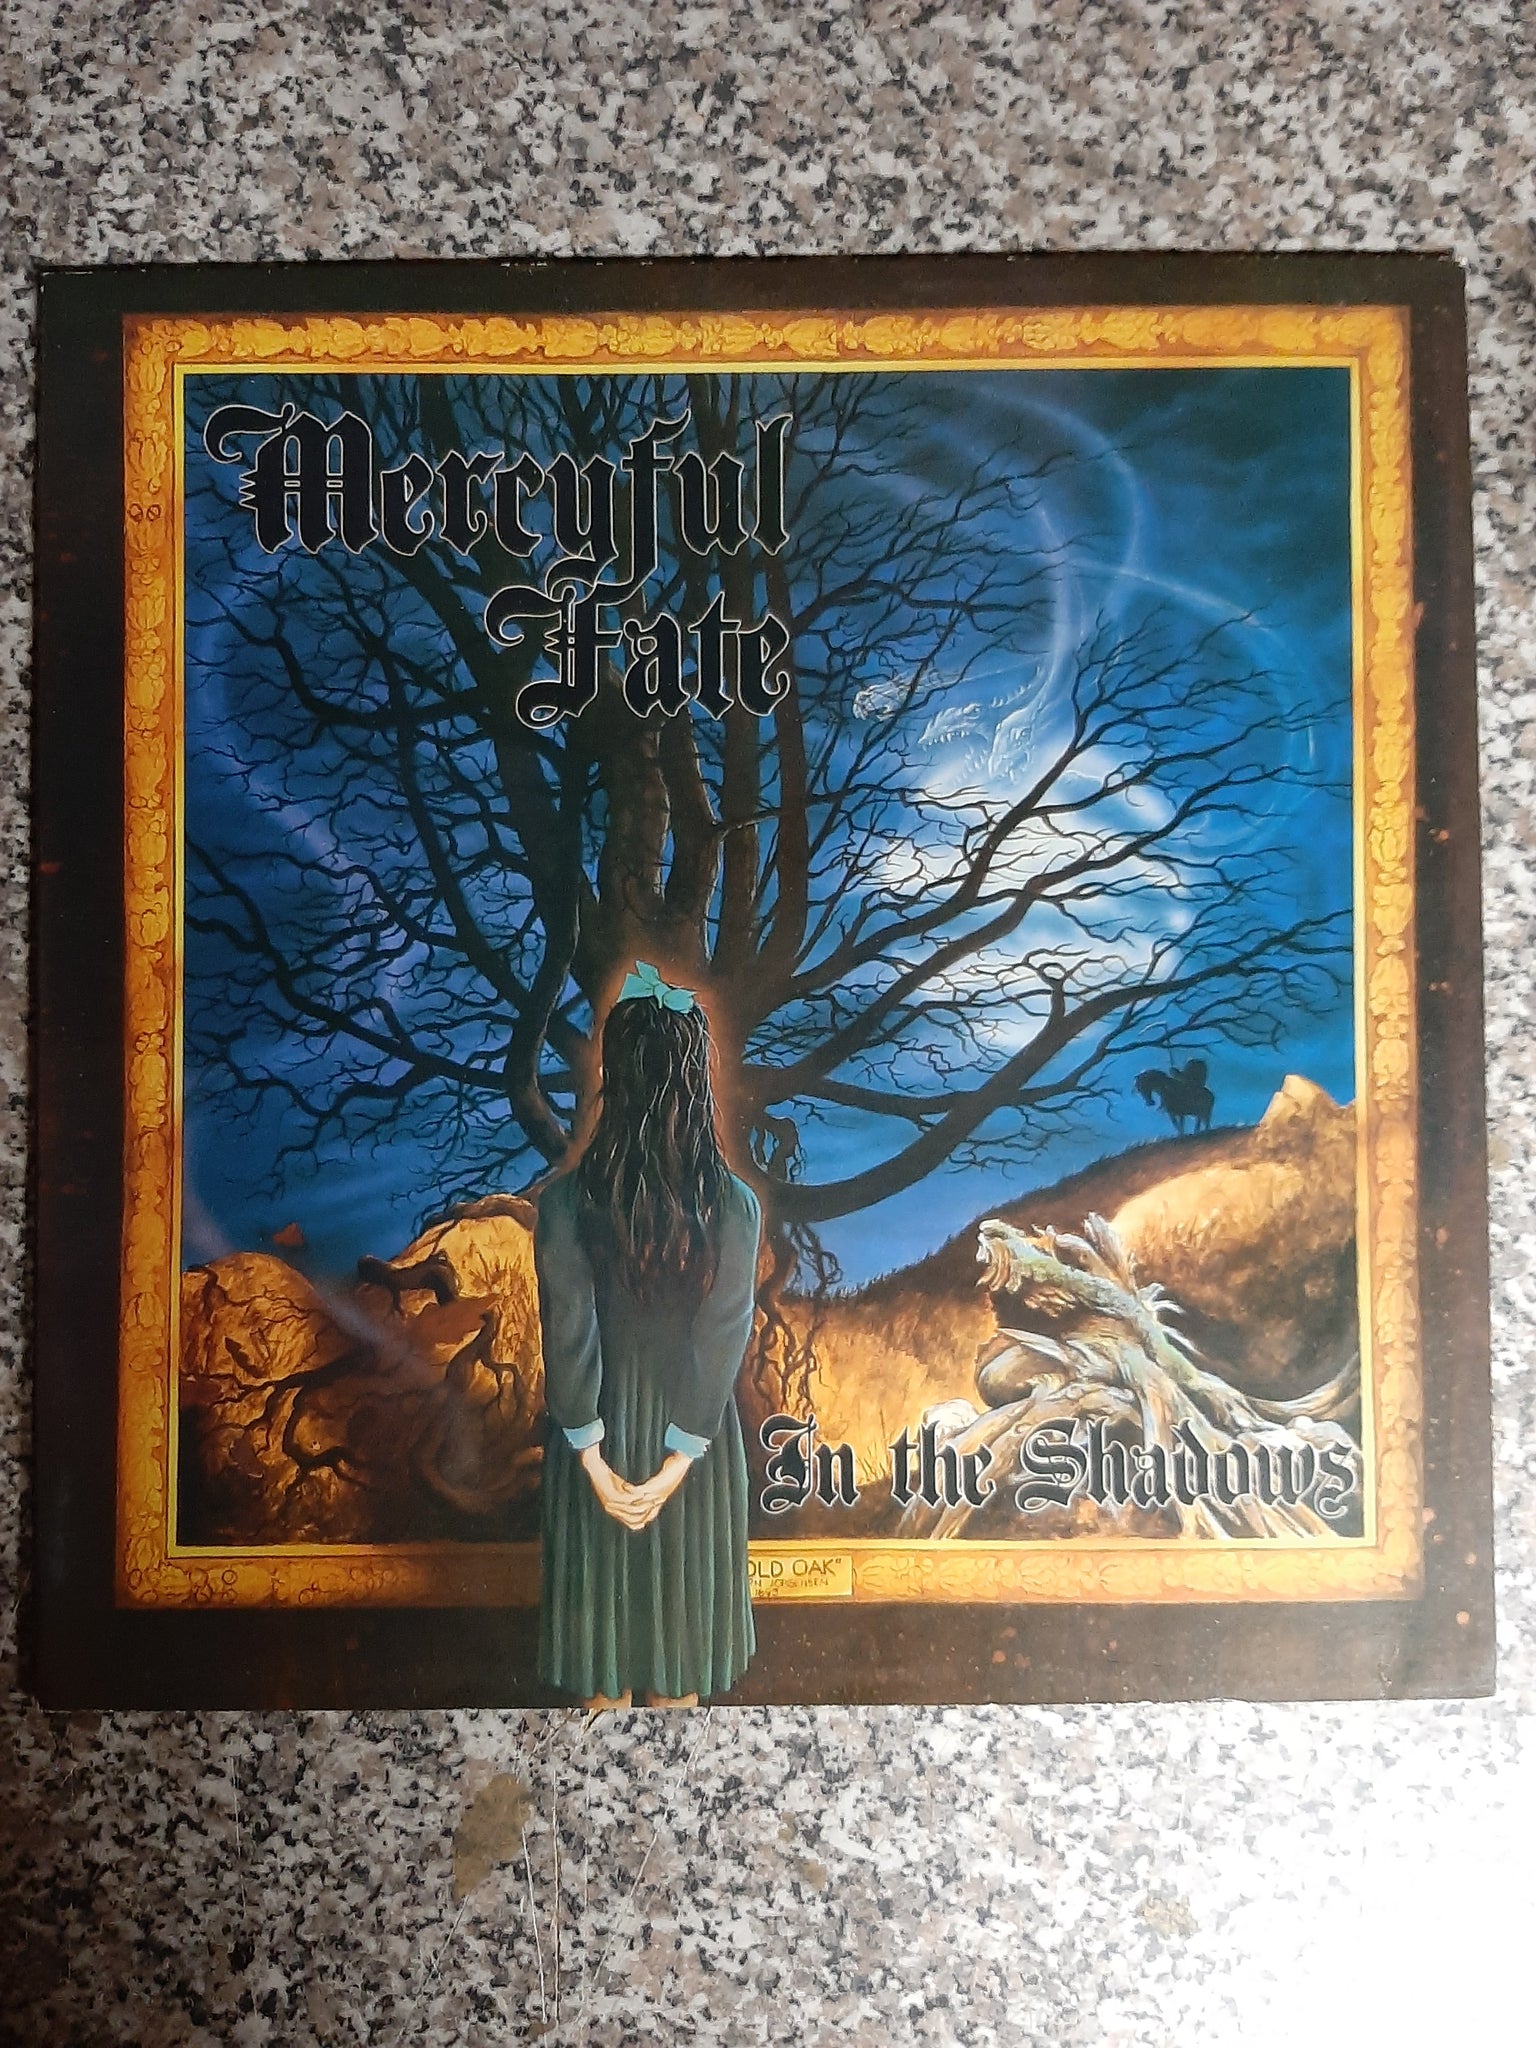 Mercyful Fate - In the Shadows - LP (Metal Blade,unofficial)